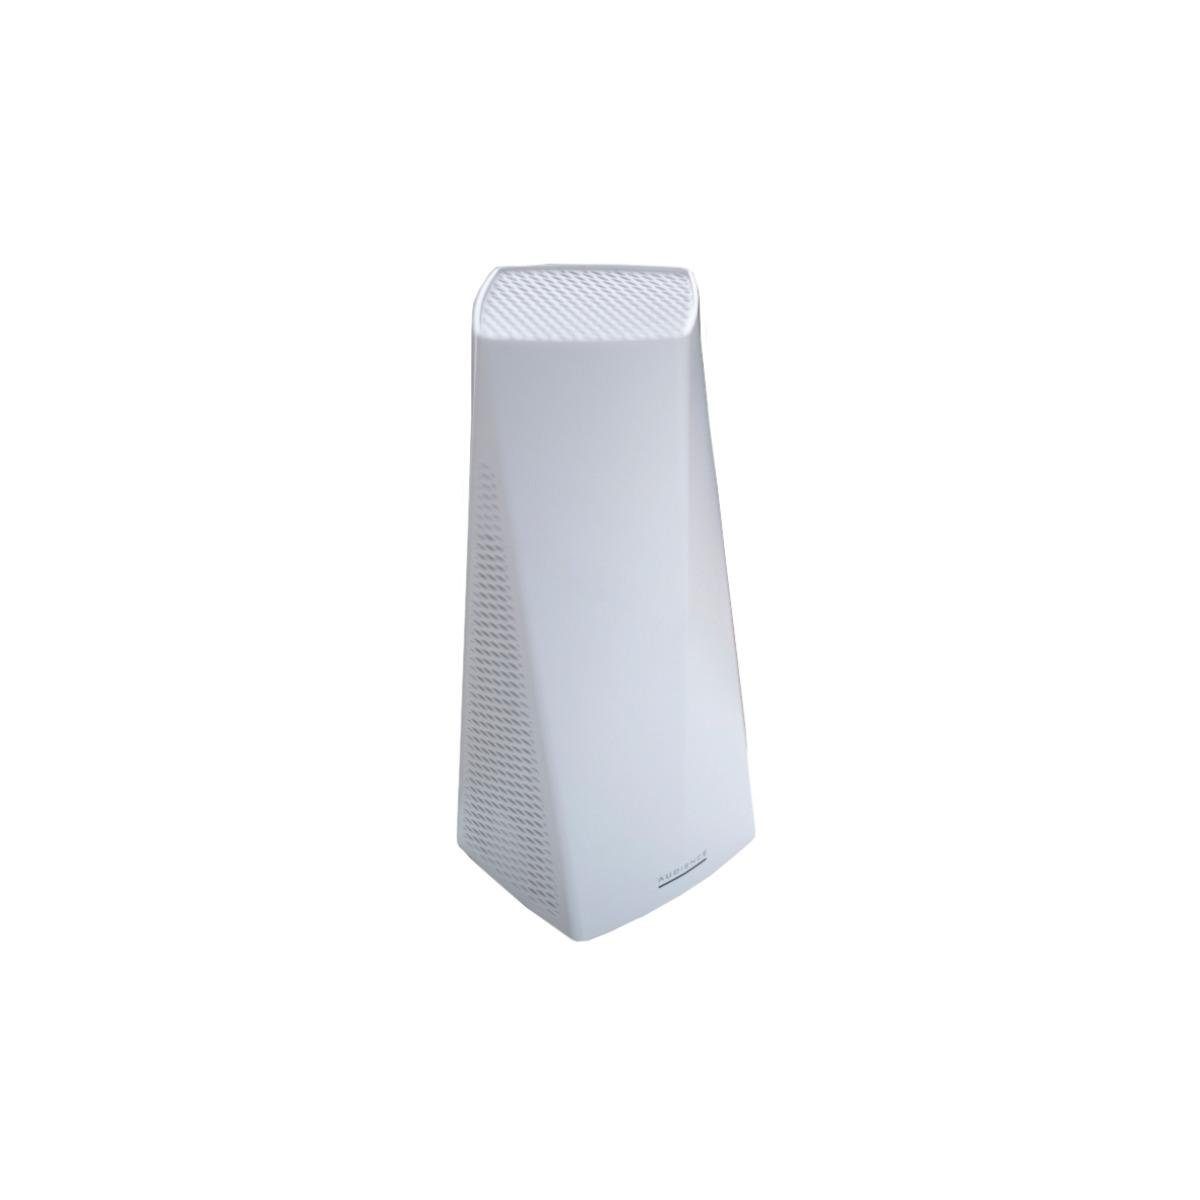 MikroTik RBD25G-5HPACQD2HPND - Audience mit 716 MHz quad-core CPU WLAN-Access Point | Router